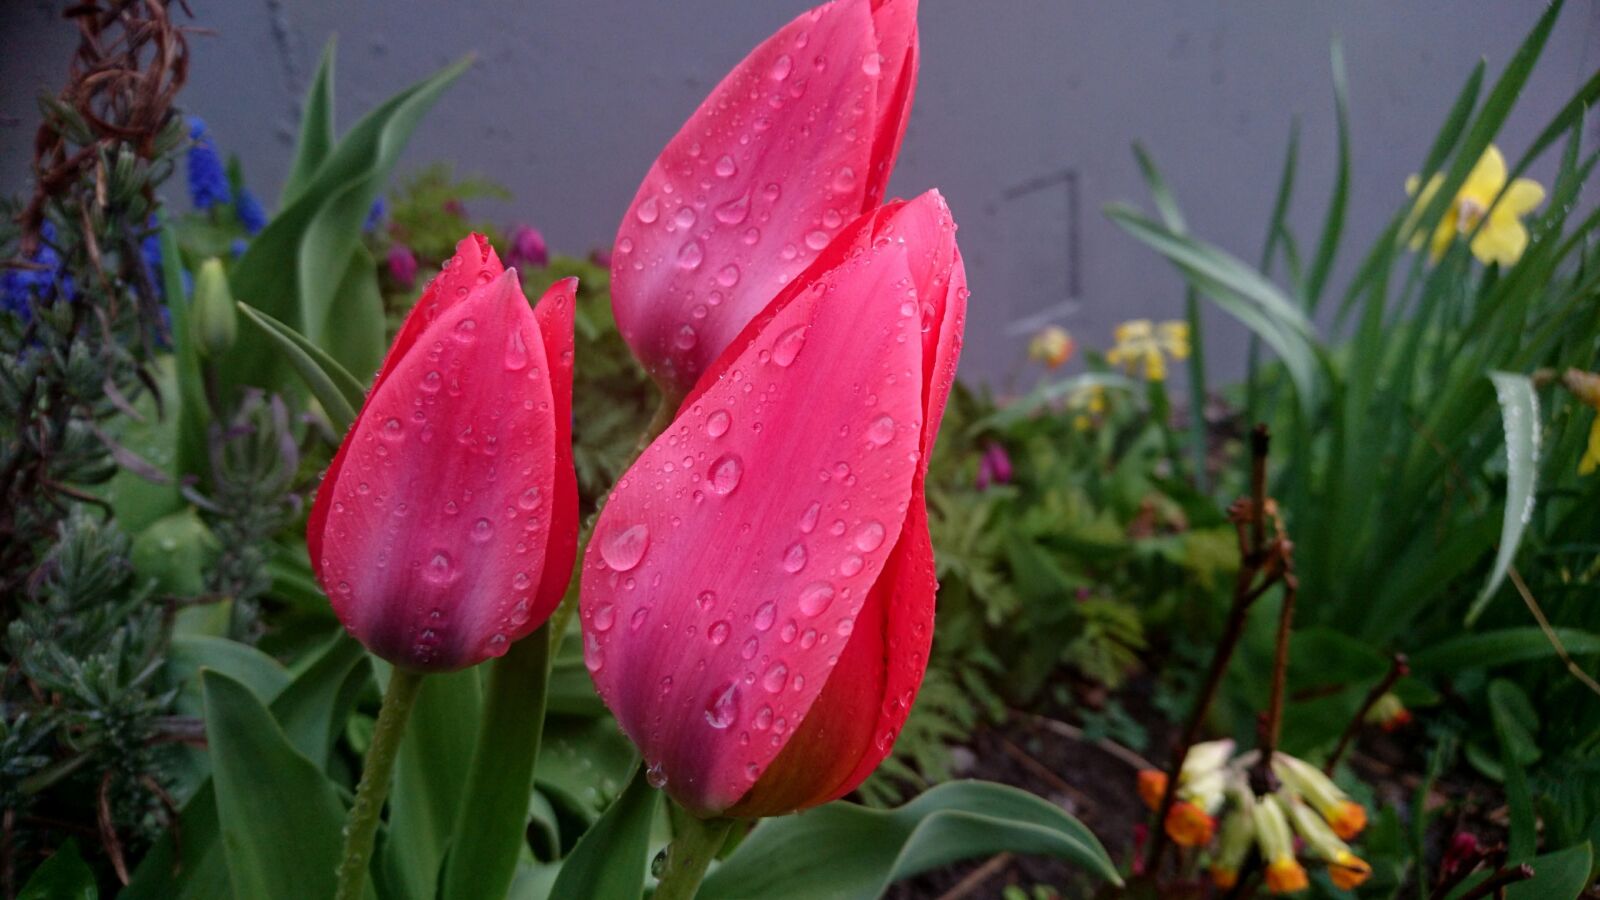 Sony Xperia Z5 Compact sample photo. Tulips, spring flowers, flowers photography